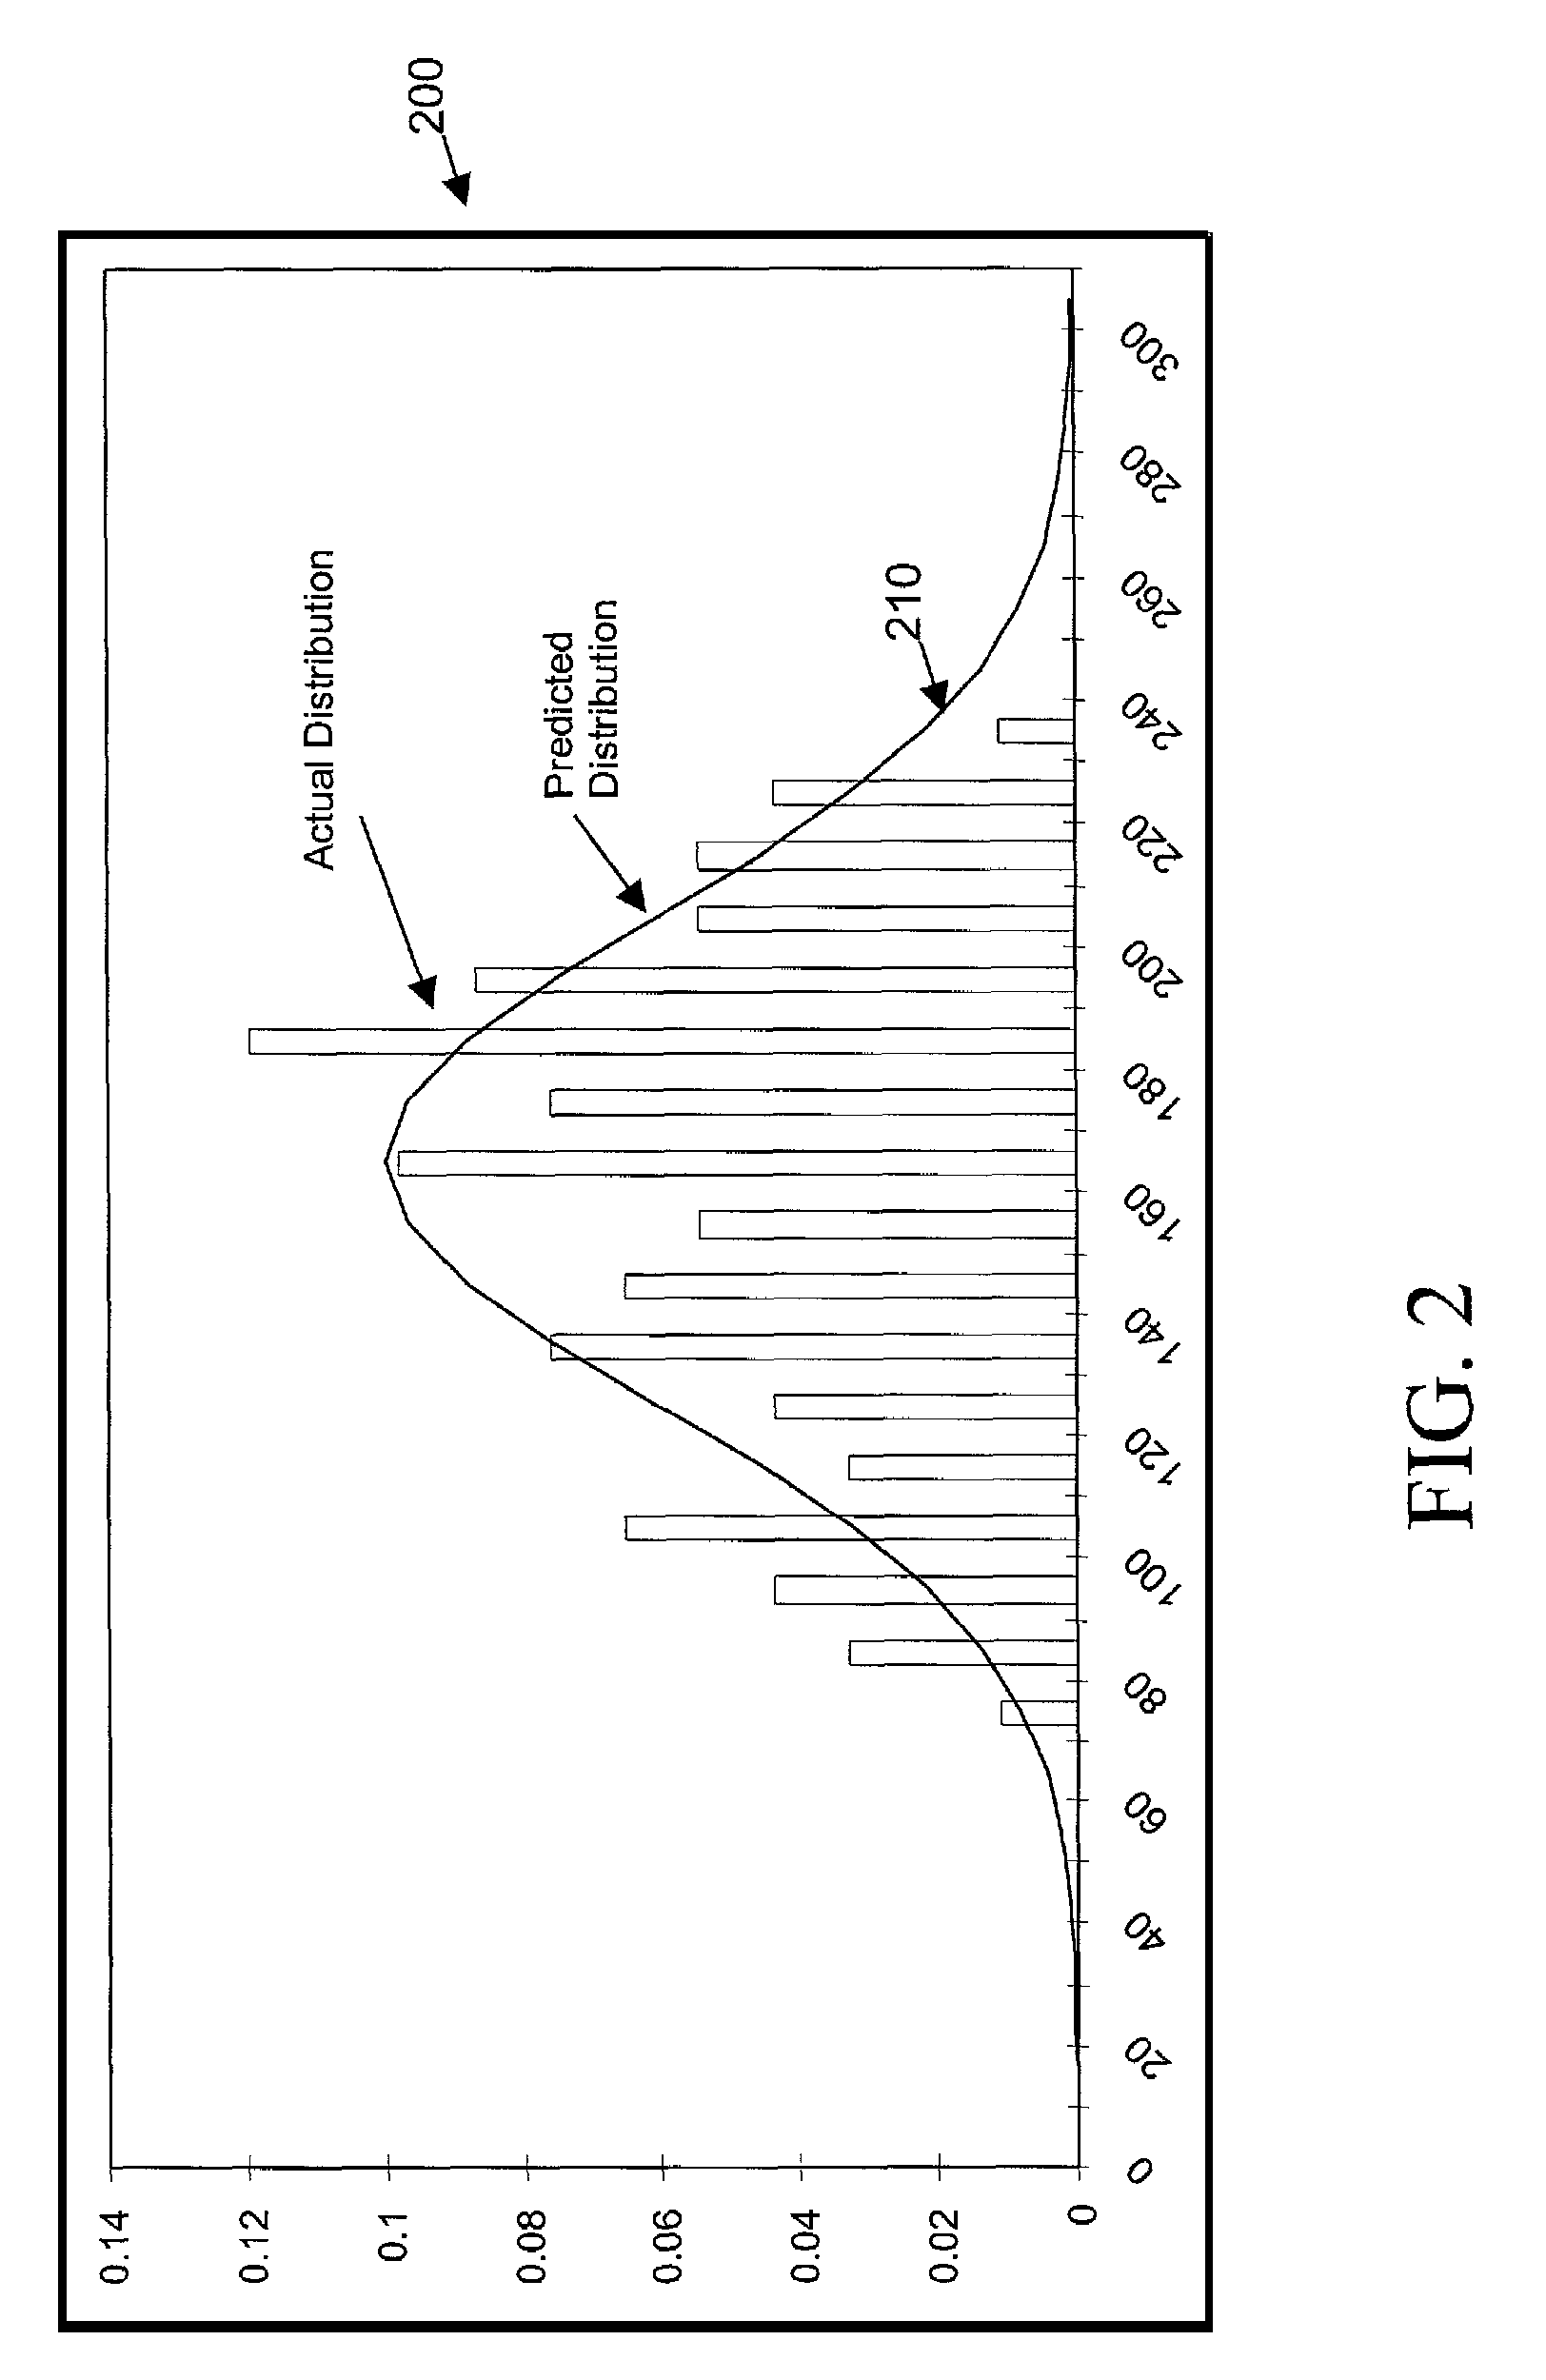 System and method for measuring and utilizing pooling analytics